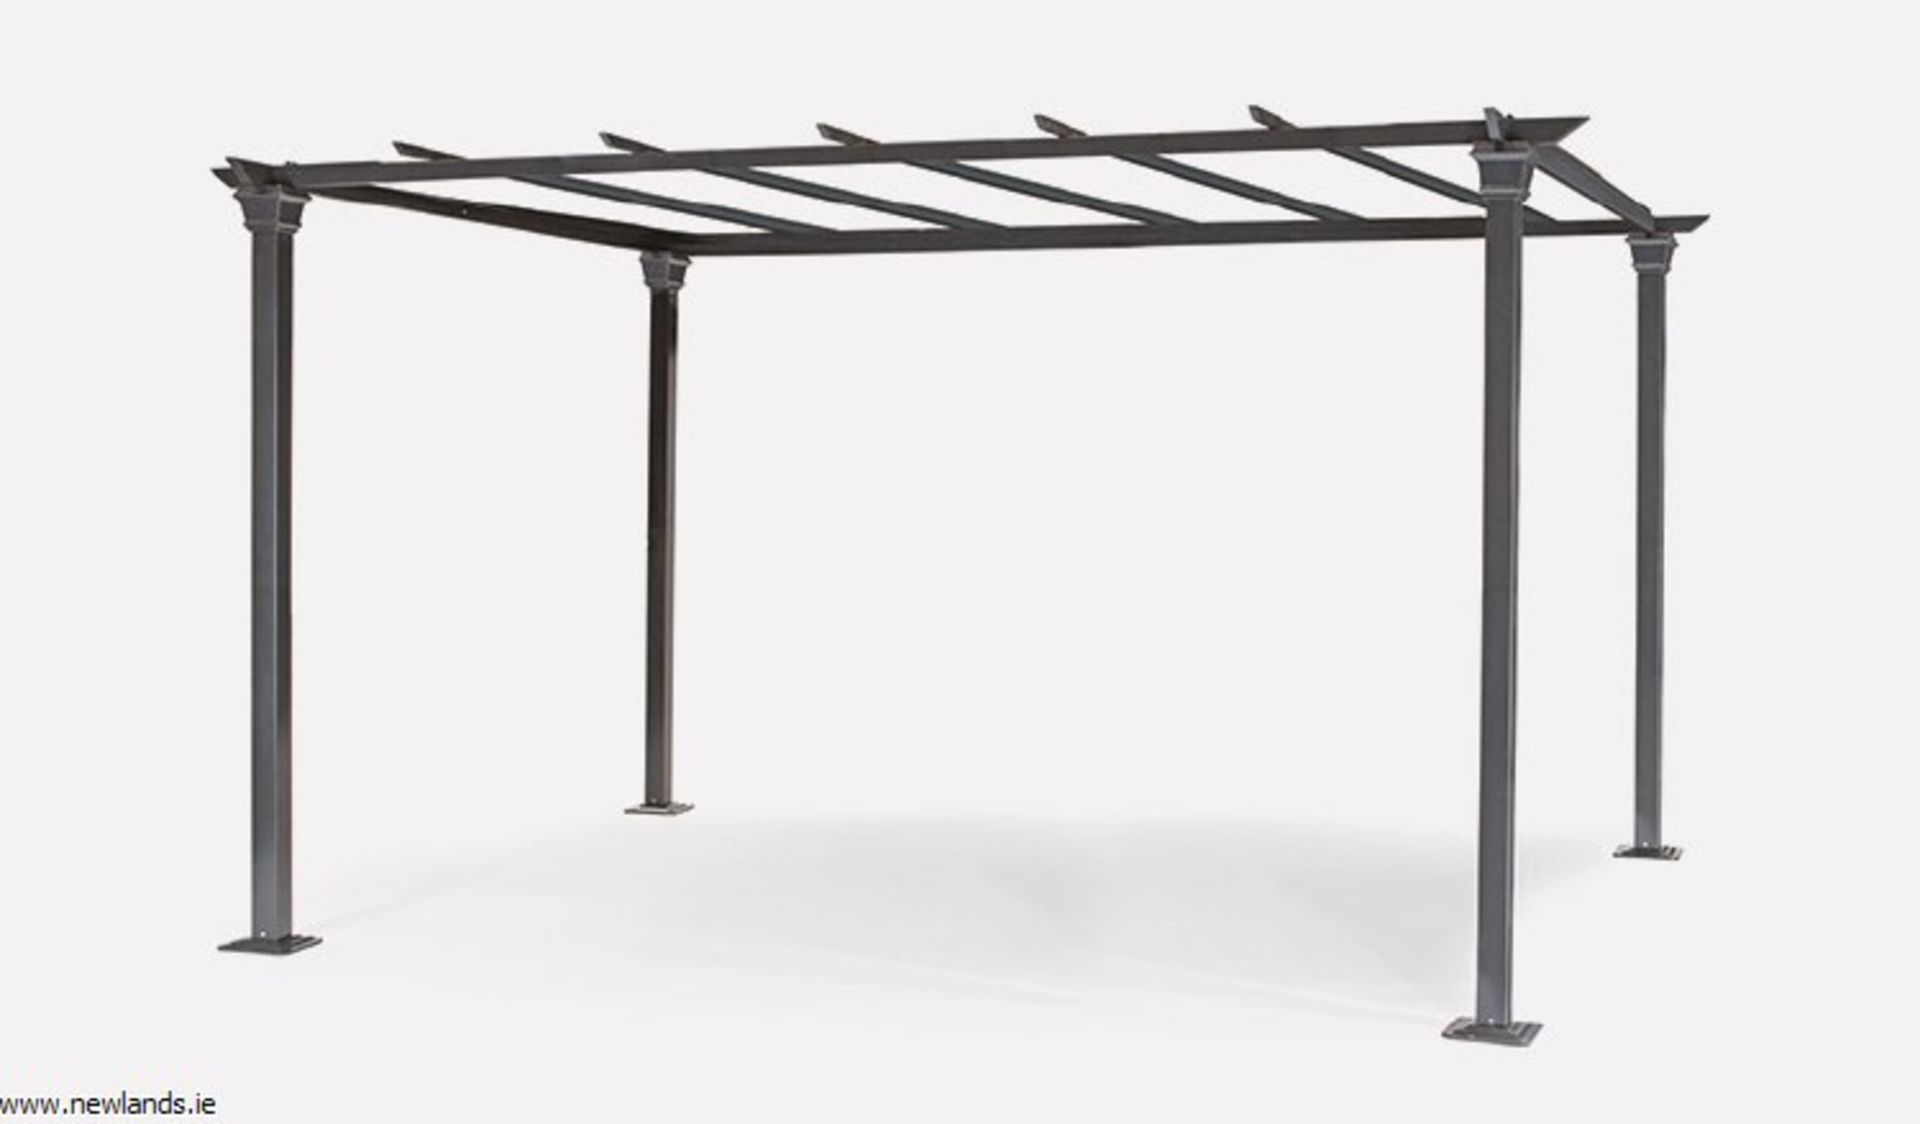 V Brand New 3m x 4m Aluminium Charcoal Grey Pergola With Zipped Cover - Sturdy Design And Folds Back - Image 2 of 2